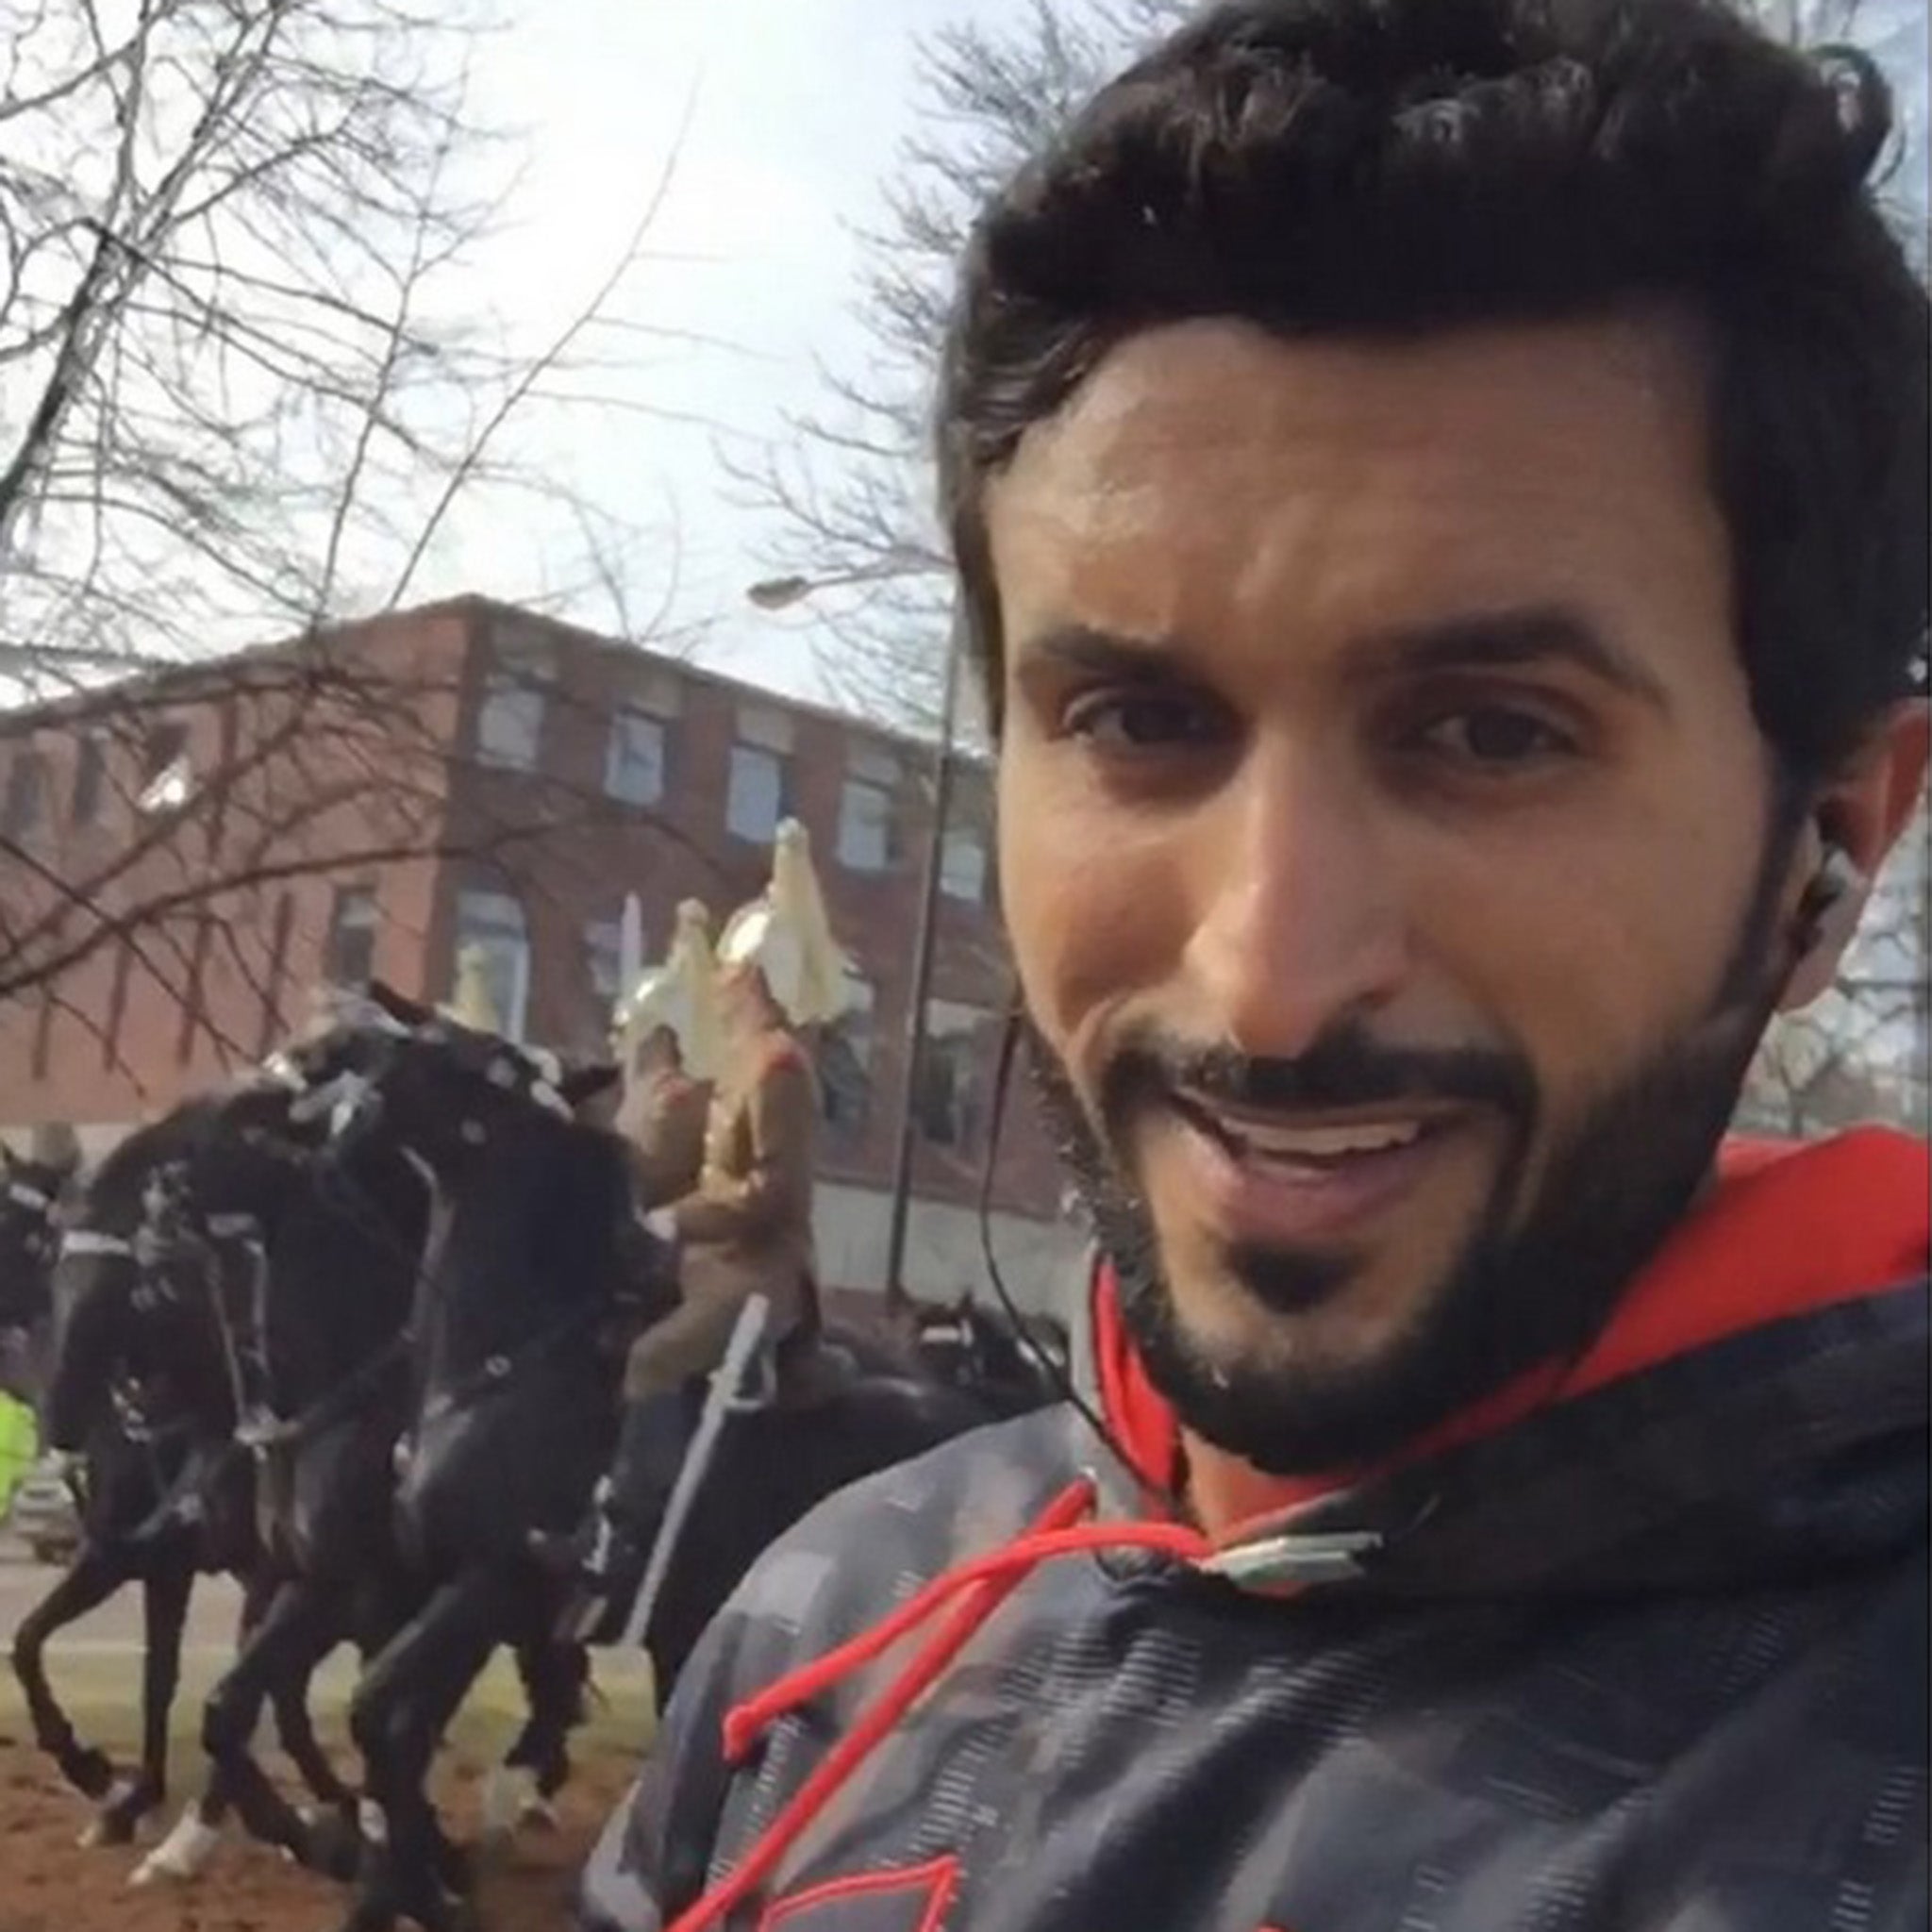 The post by Bahrain's Prince Nasser bin Hamad Al Khalifaon Instagram was captioned: “That’s how its feels, and sounds when you run in the Hyde Park, London.”